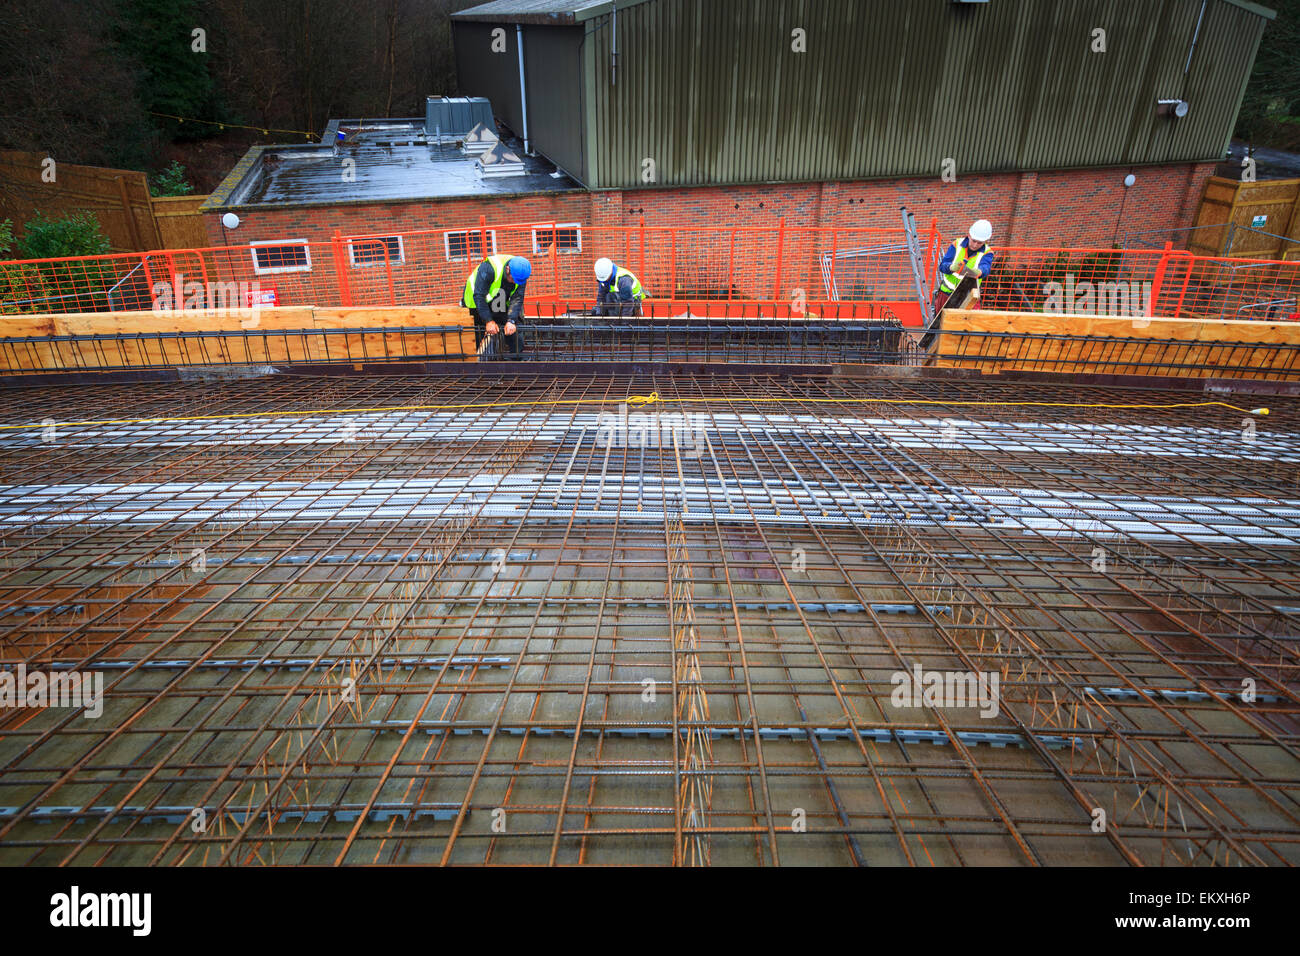 Concrete reinforcing bars laid on roof prior to pouring. Stock Photo